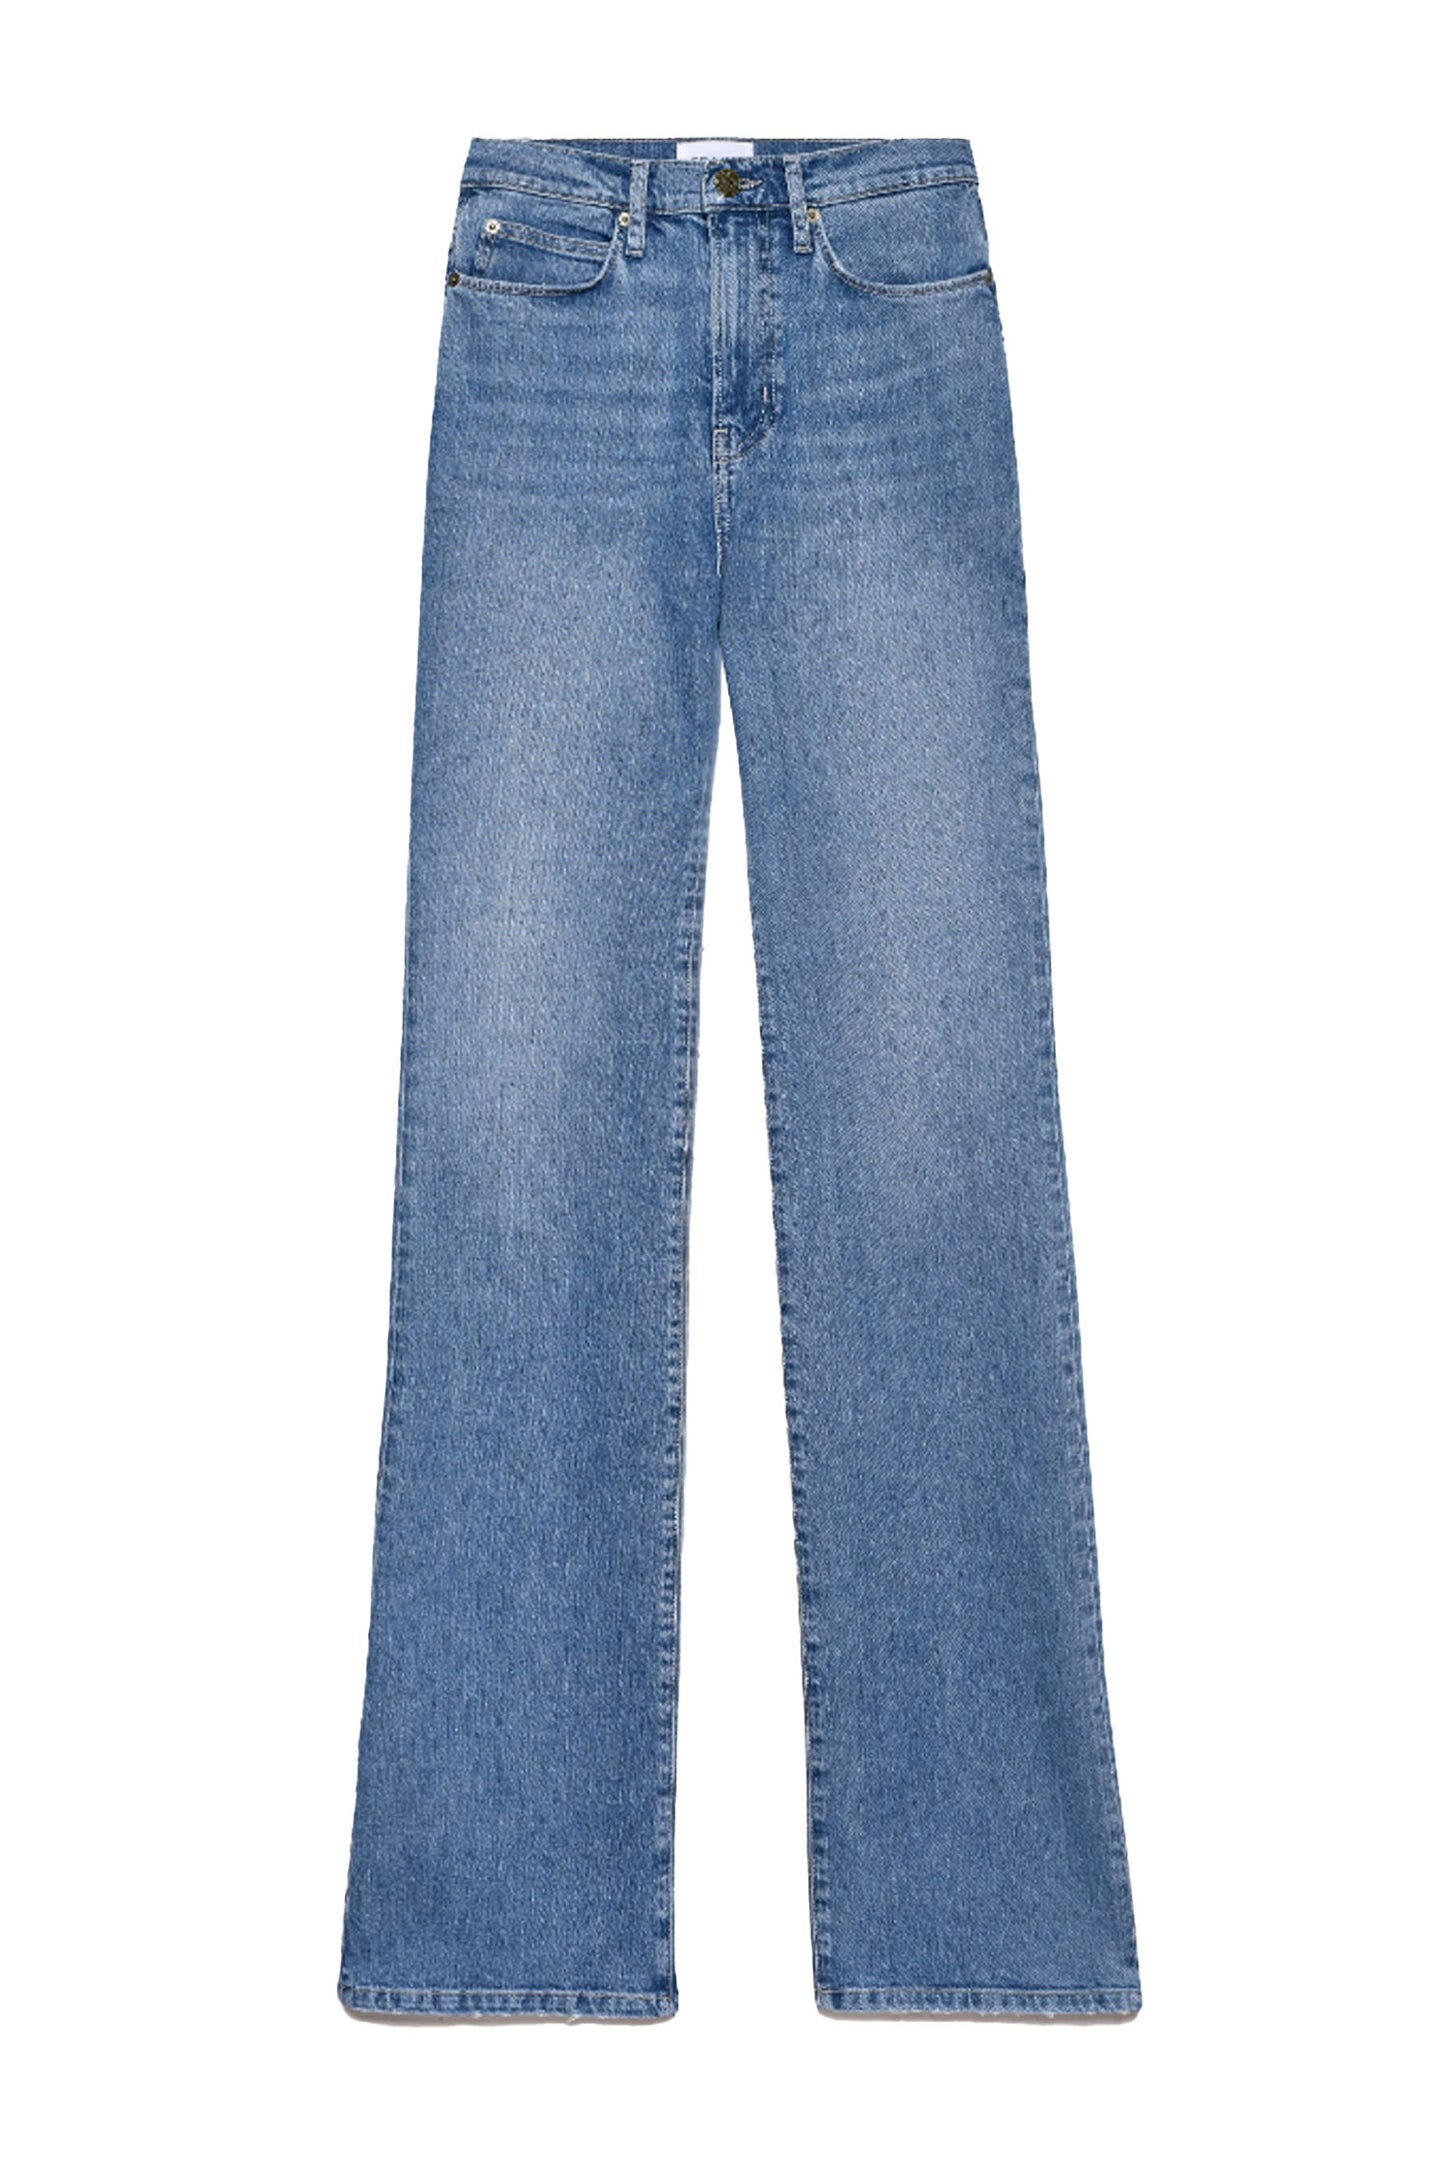 The Slim Stacked Jean